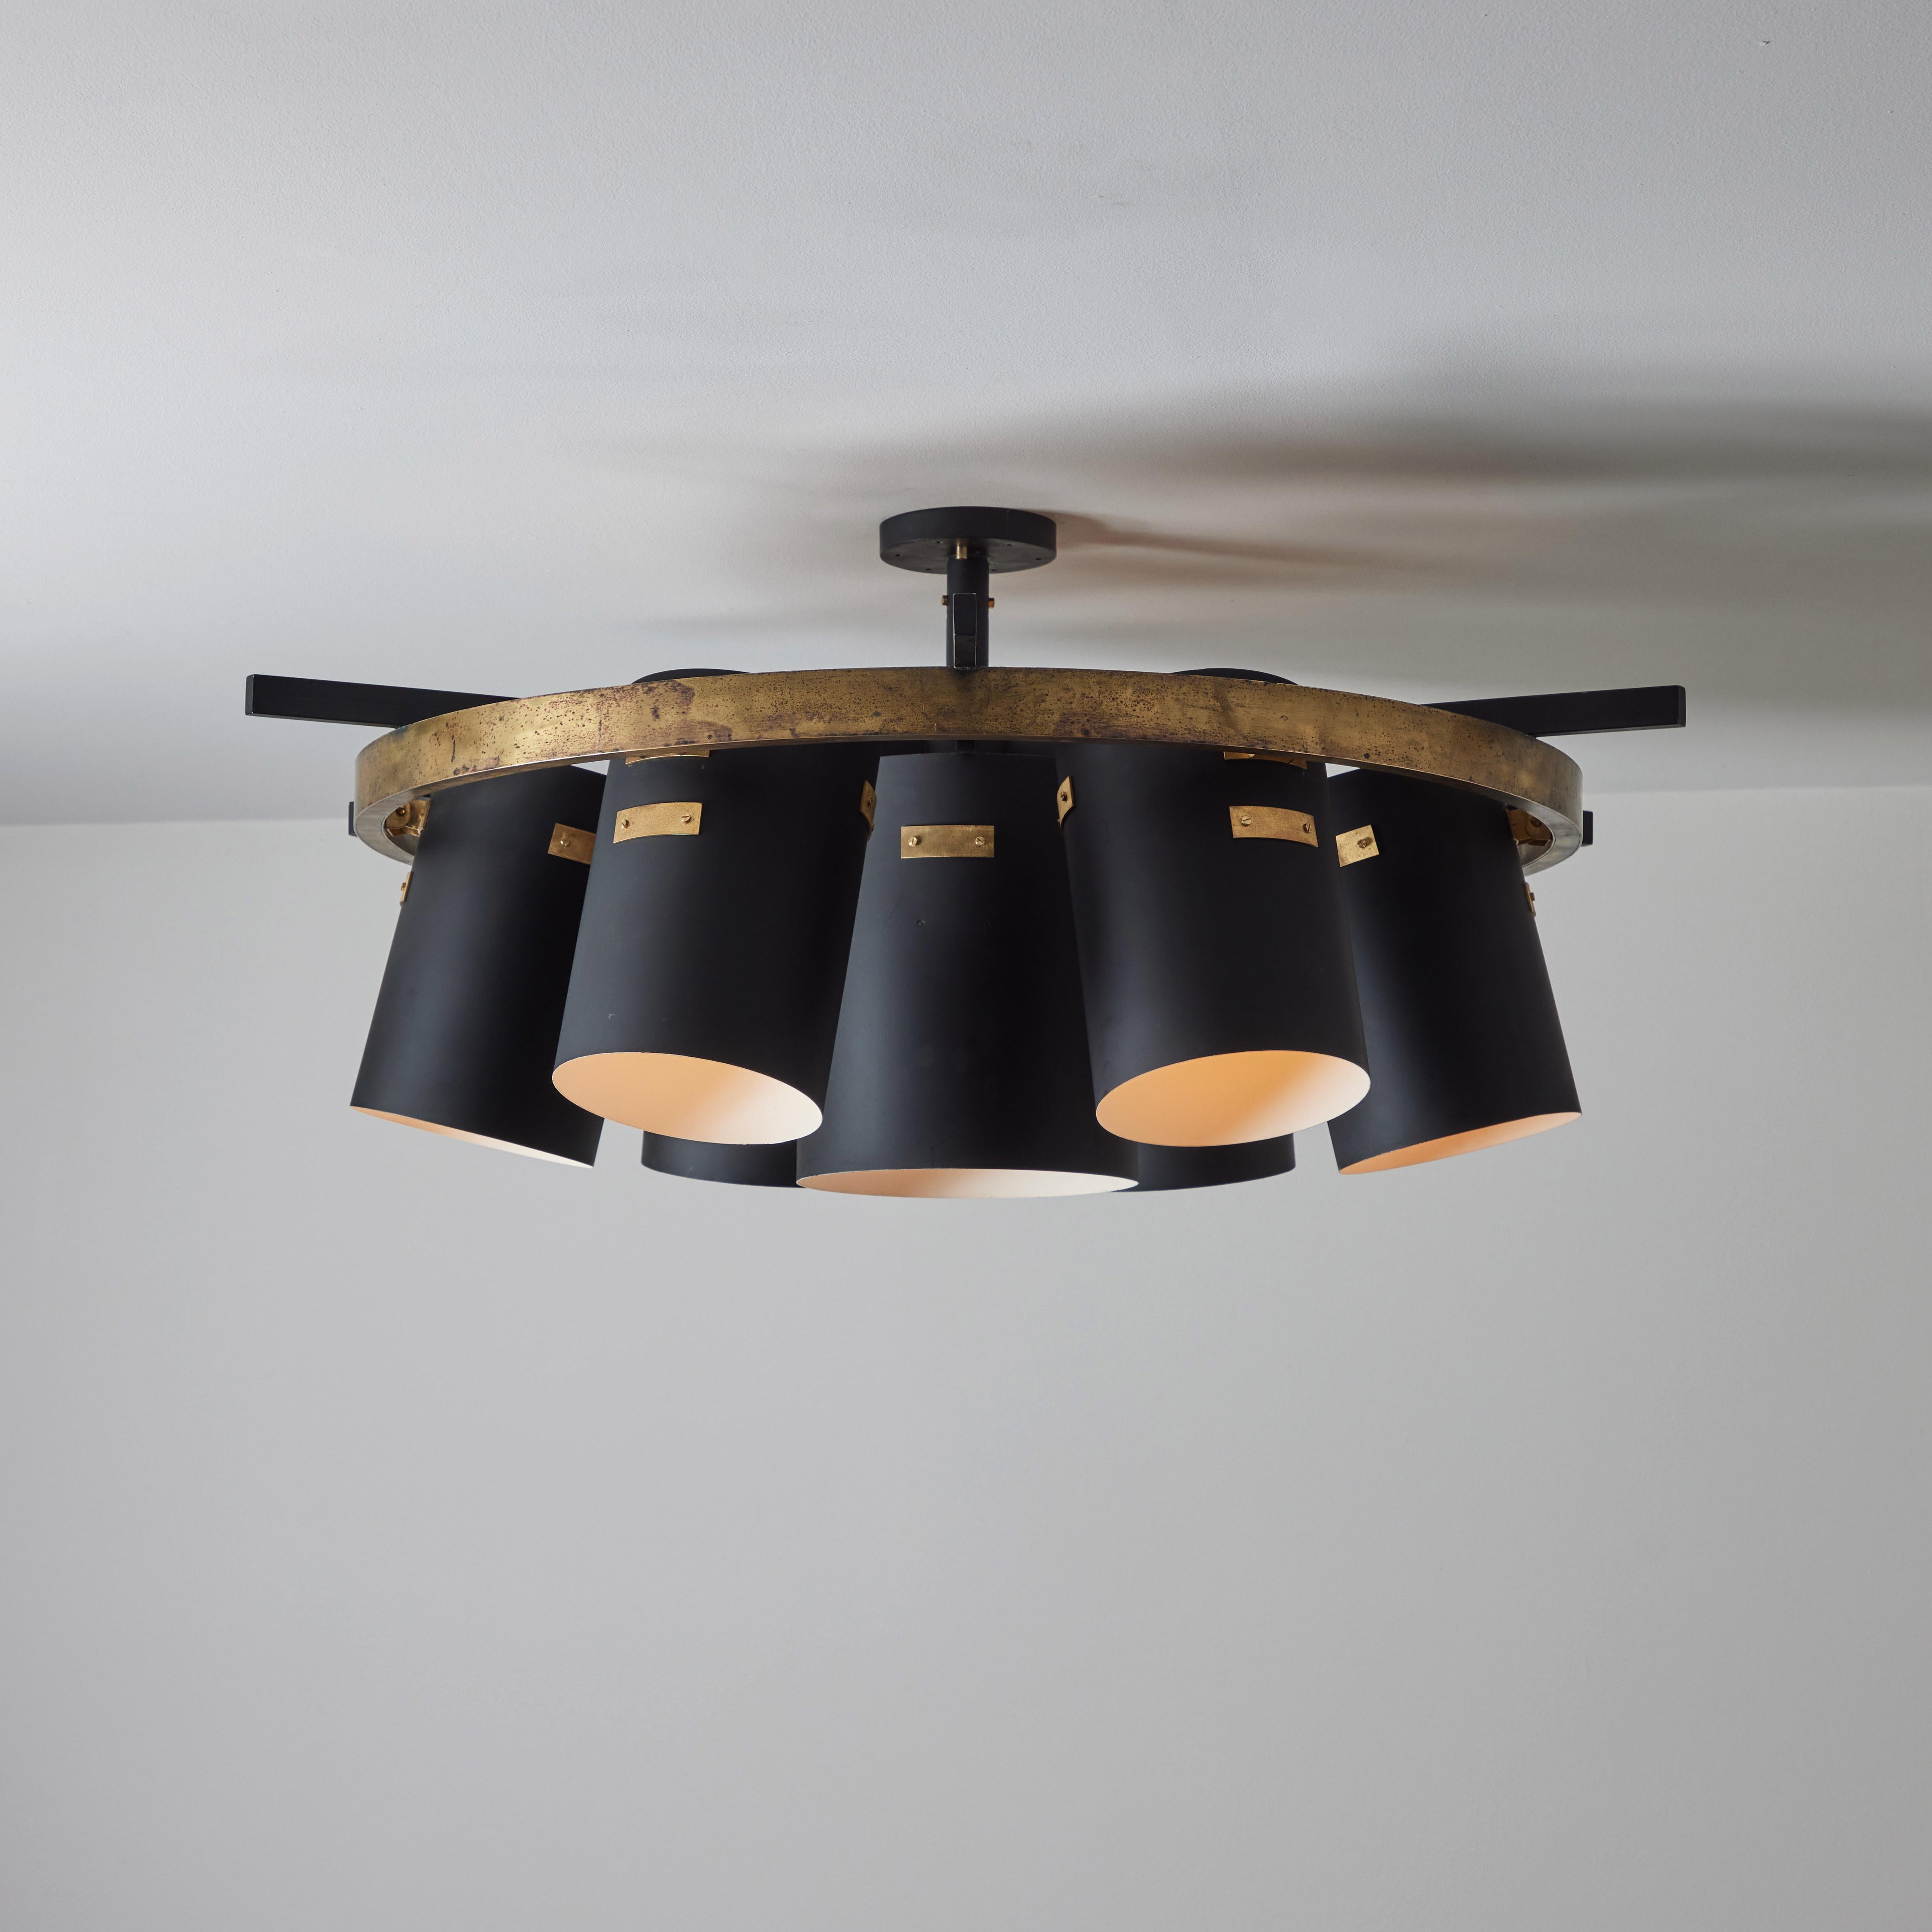 Single large custom Italian ceiling light. Designed and manufactured in Italy, circa the 1960s. Black enameled drums are situated around a large brass wheel. All drums can articulate between ten and twenty degrees outwards. Wired for the US. Holds